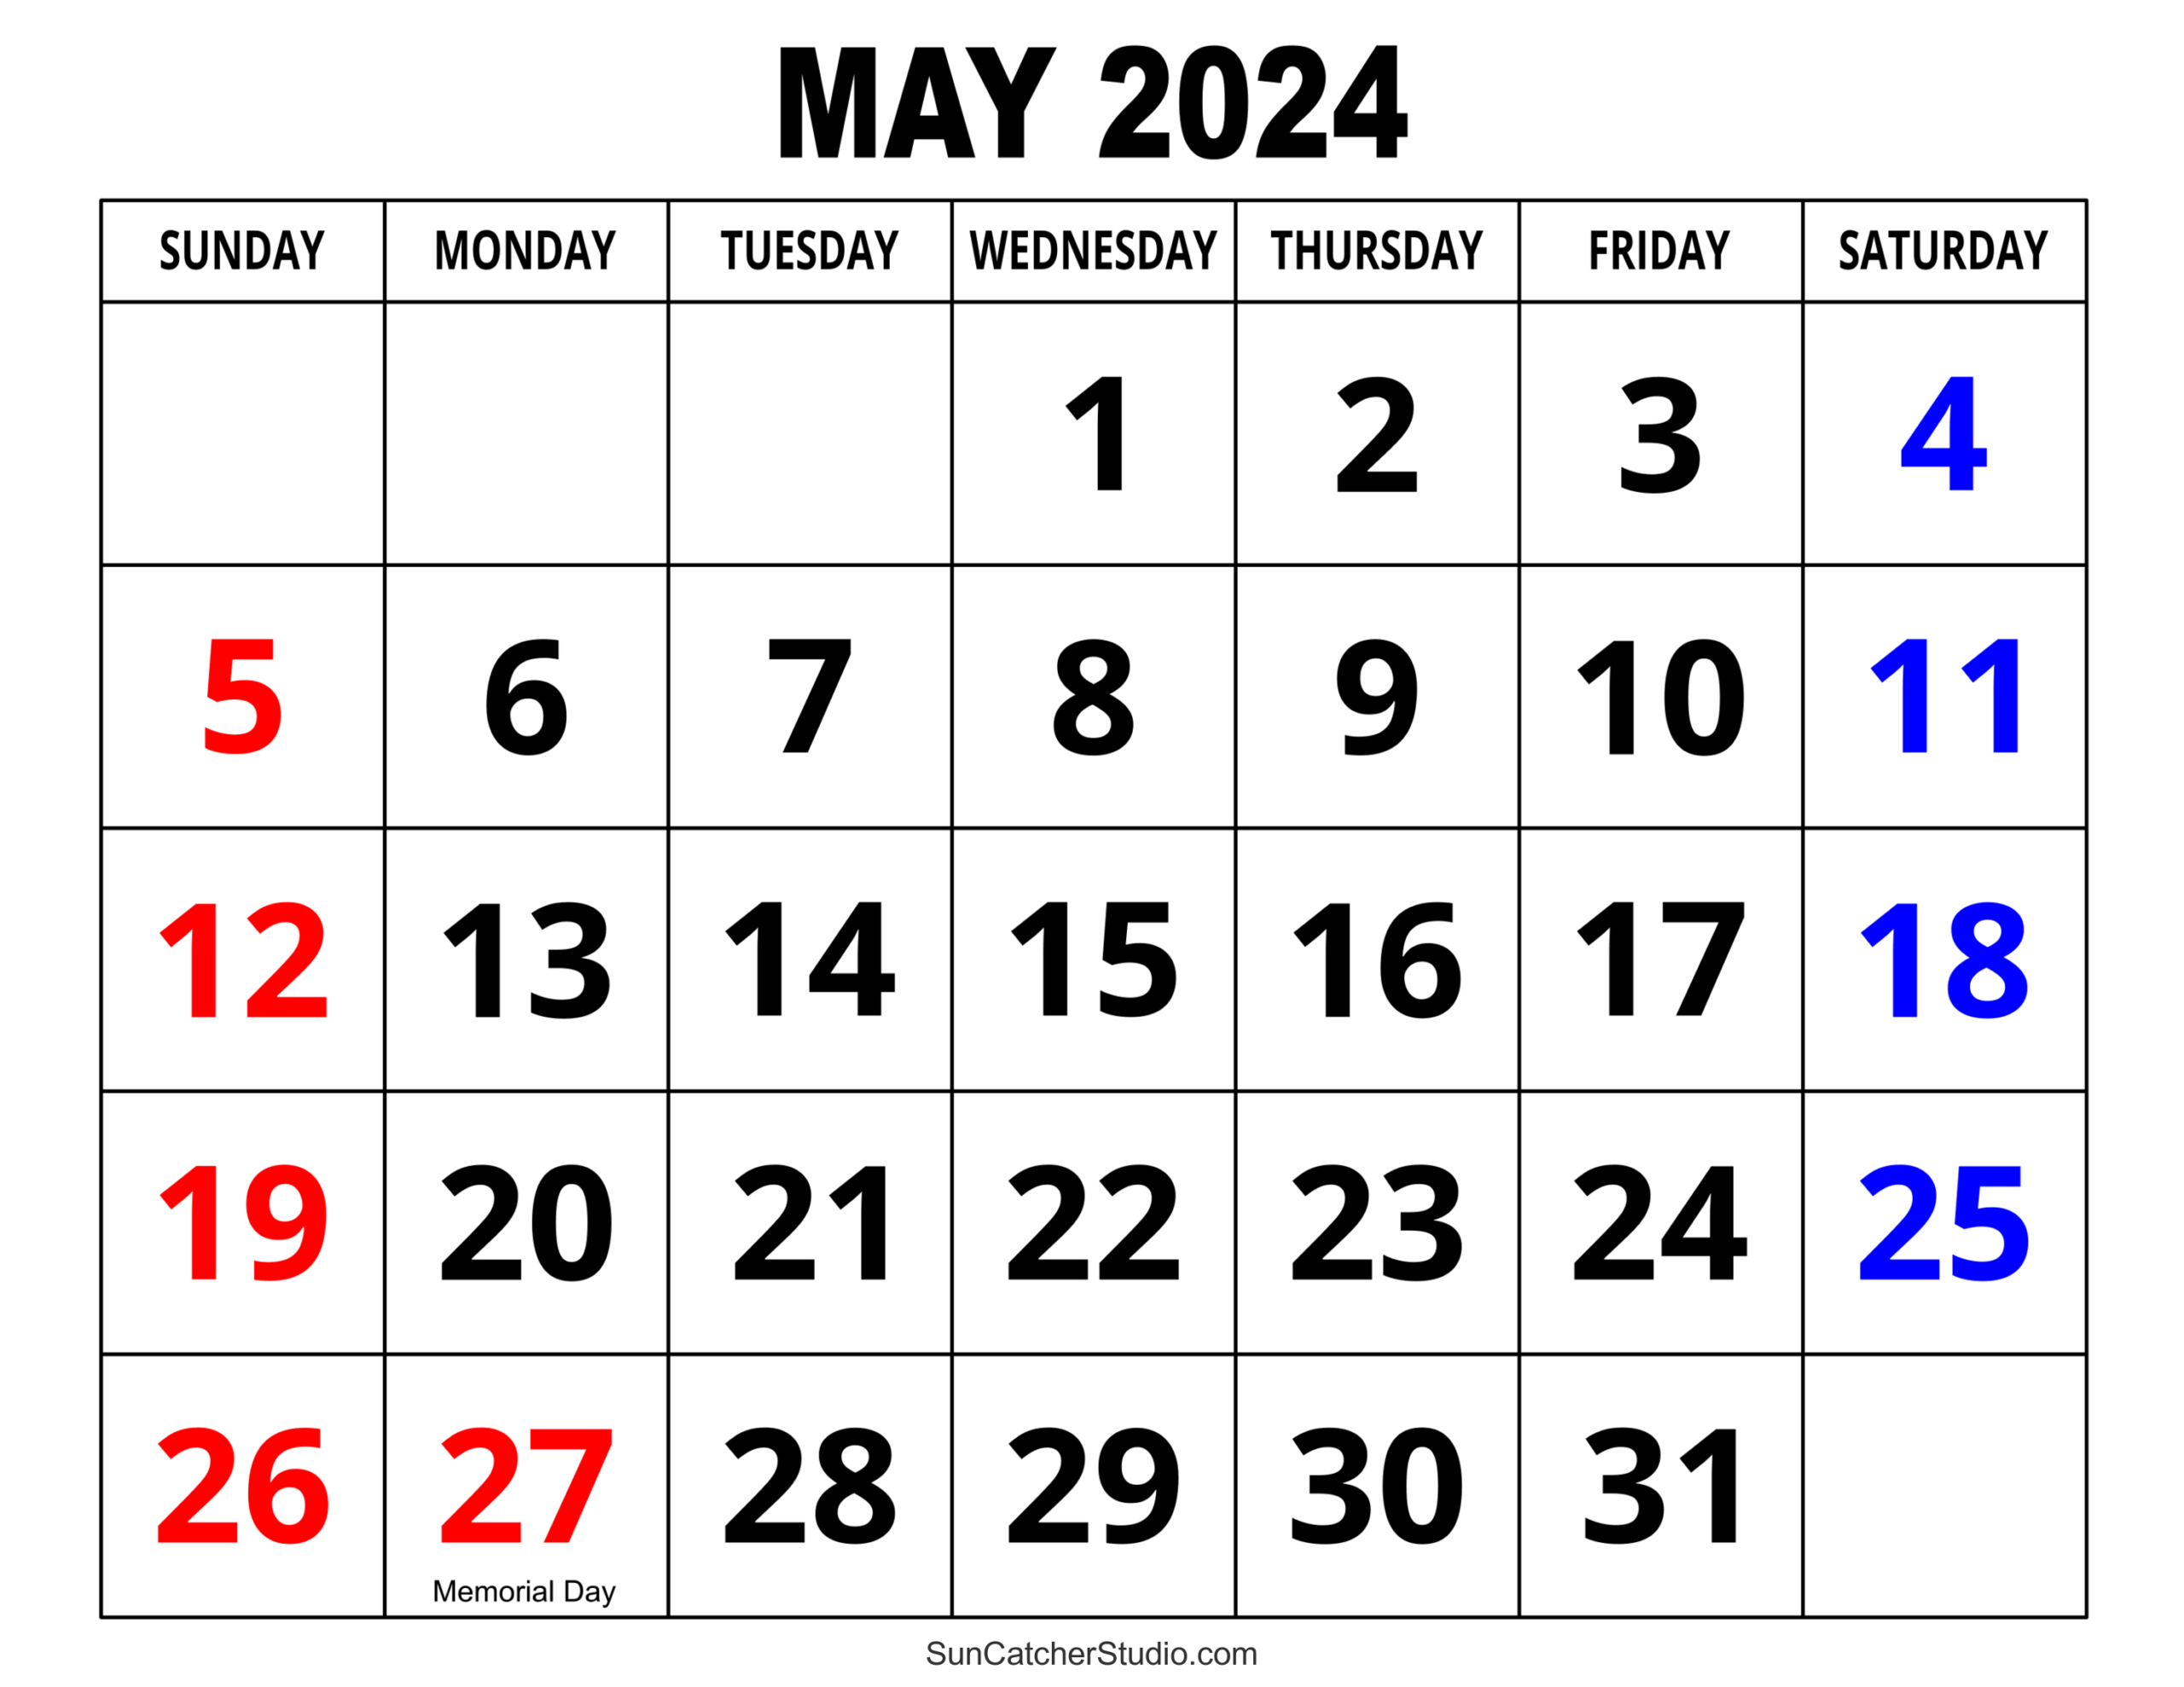 May 2024 Calendar (Free Printable) – Diy Projects, Patterns | Printable Calendar 2024 Monthly With Holidays